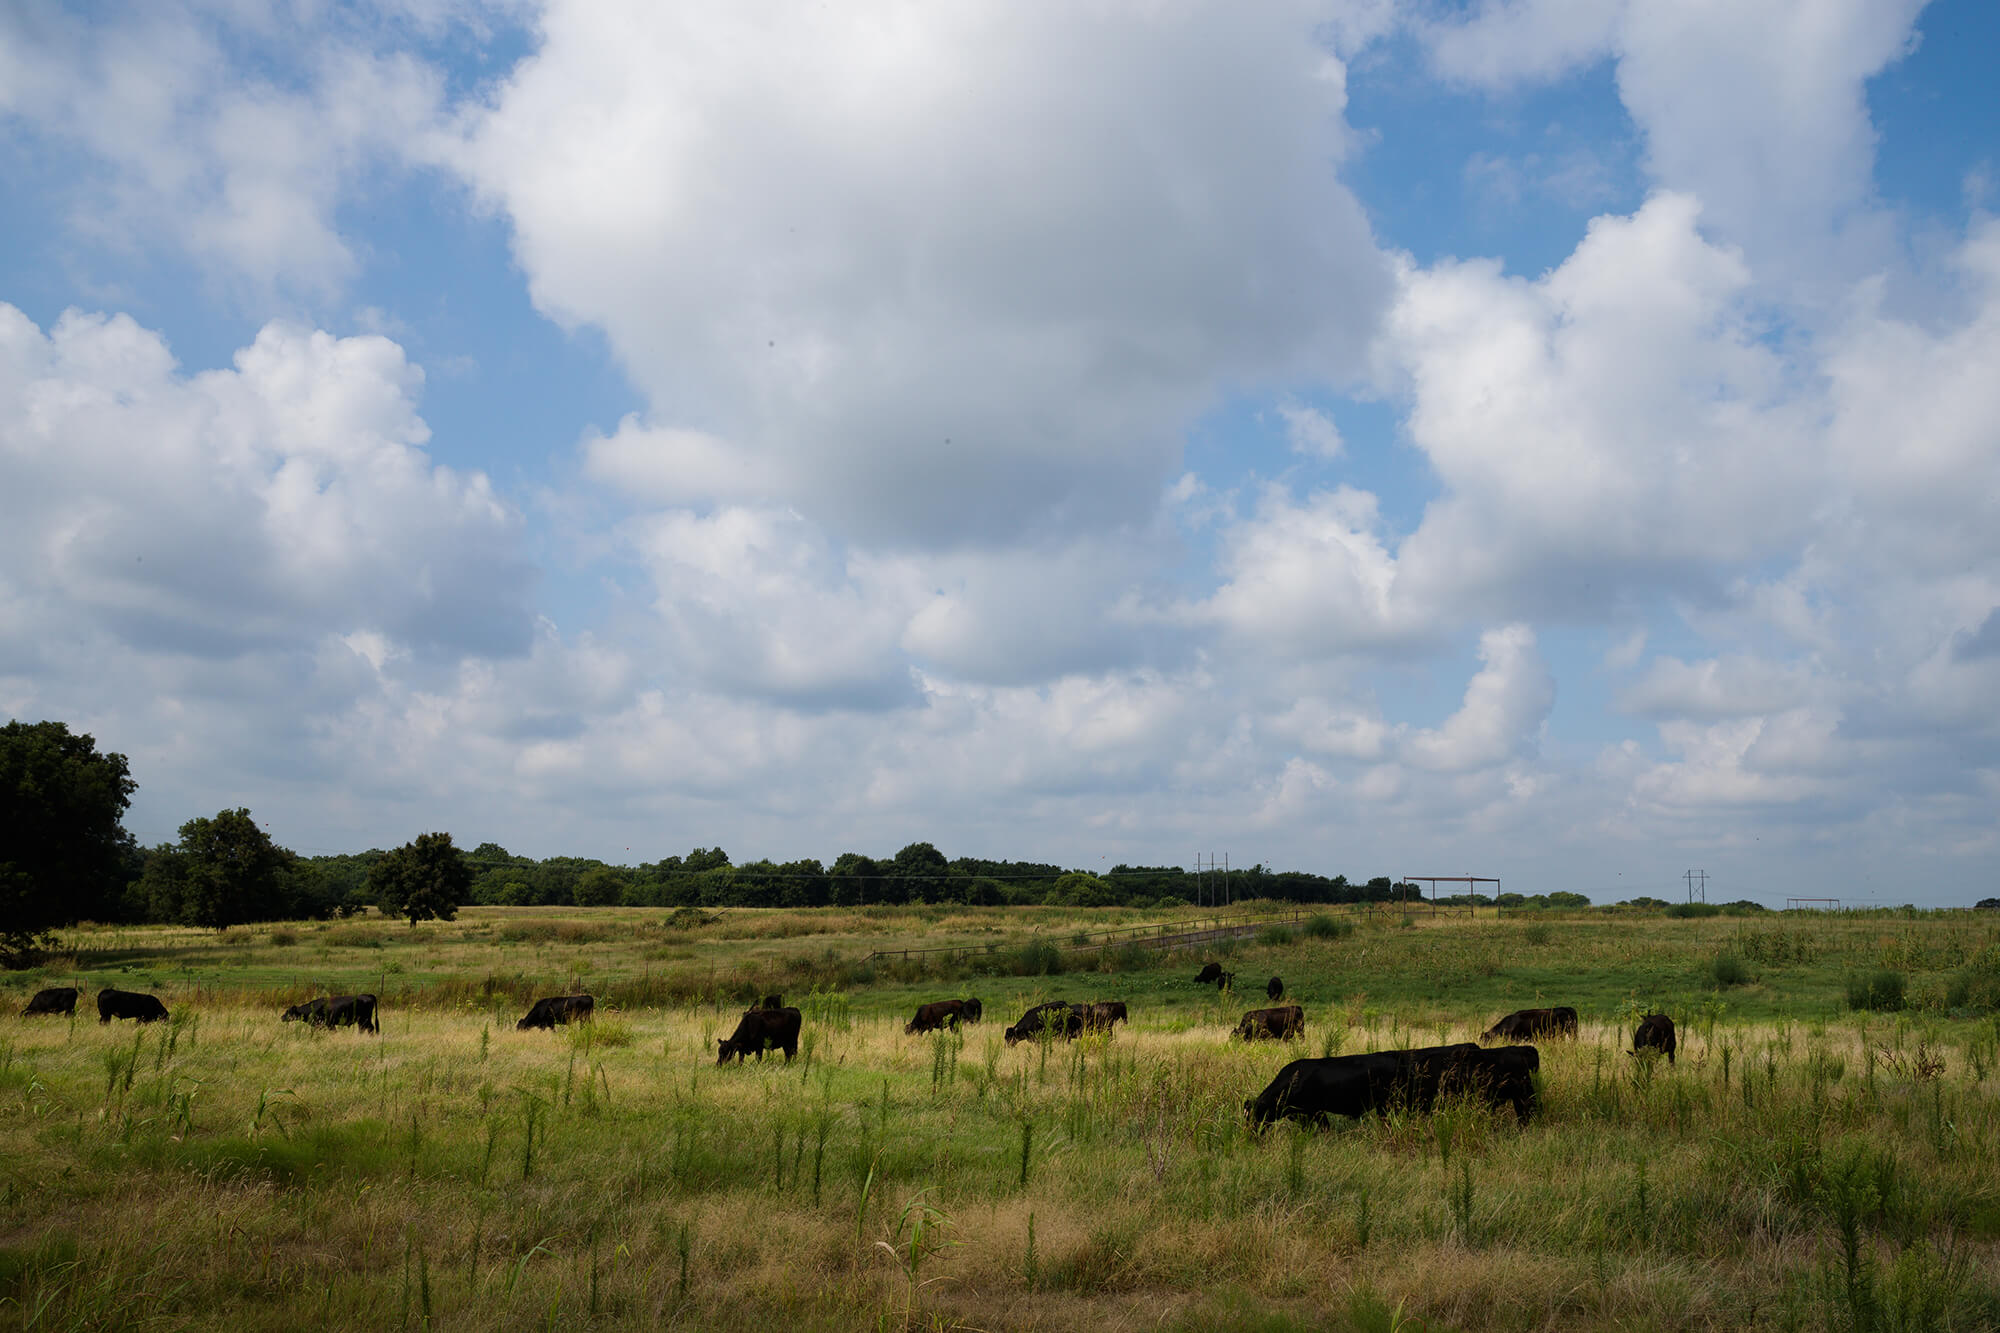 Cattle grazing cover crops in pasture under a cloudy sky